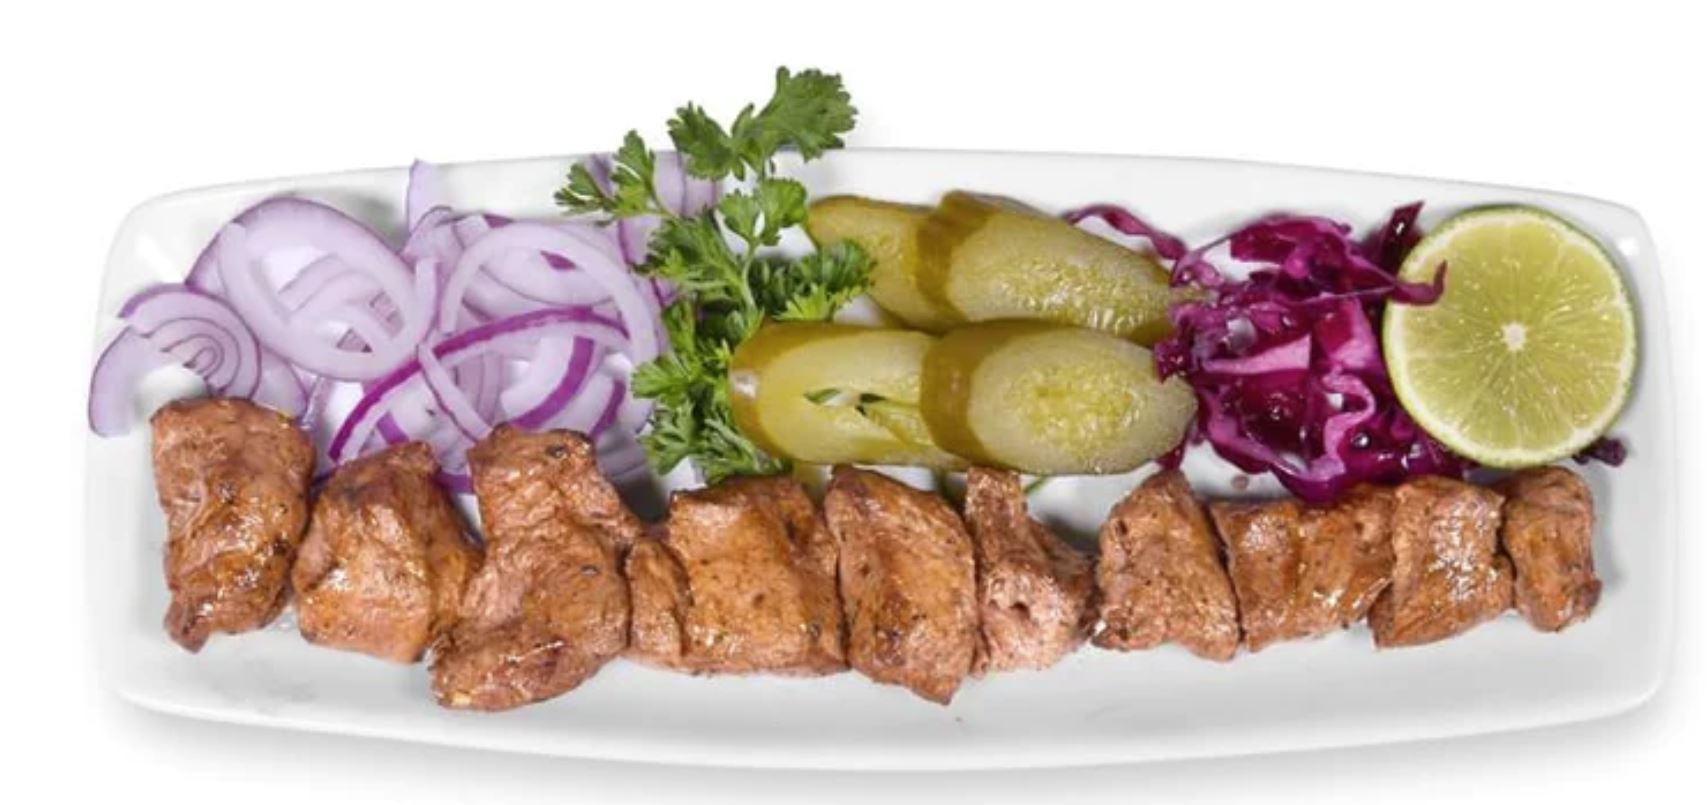 Chenjeh Kebab with rice ( 1 Skewer of lamb with rice)